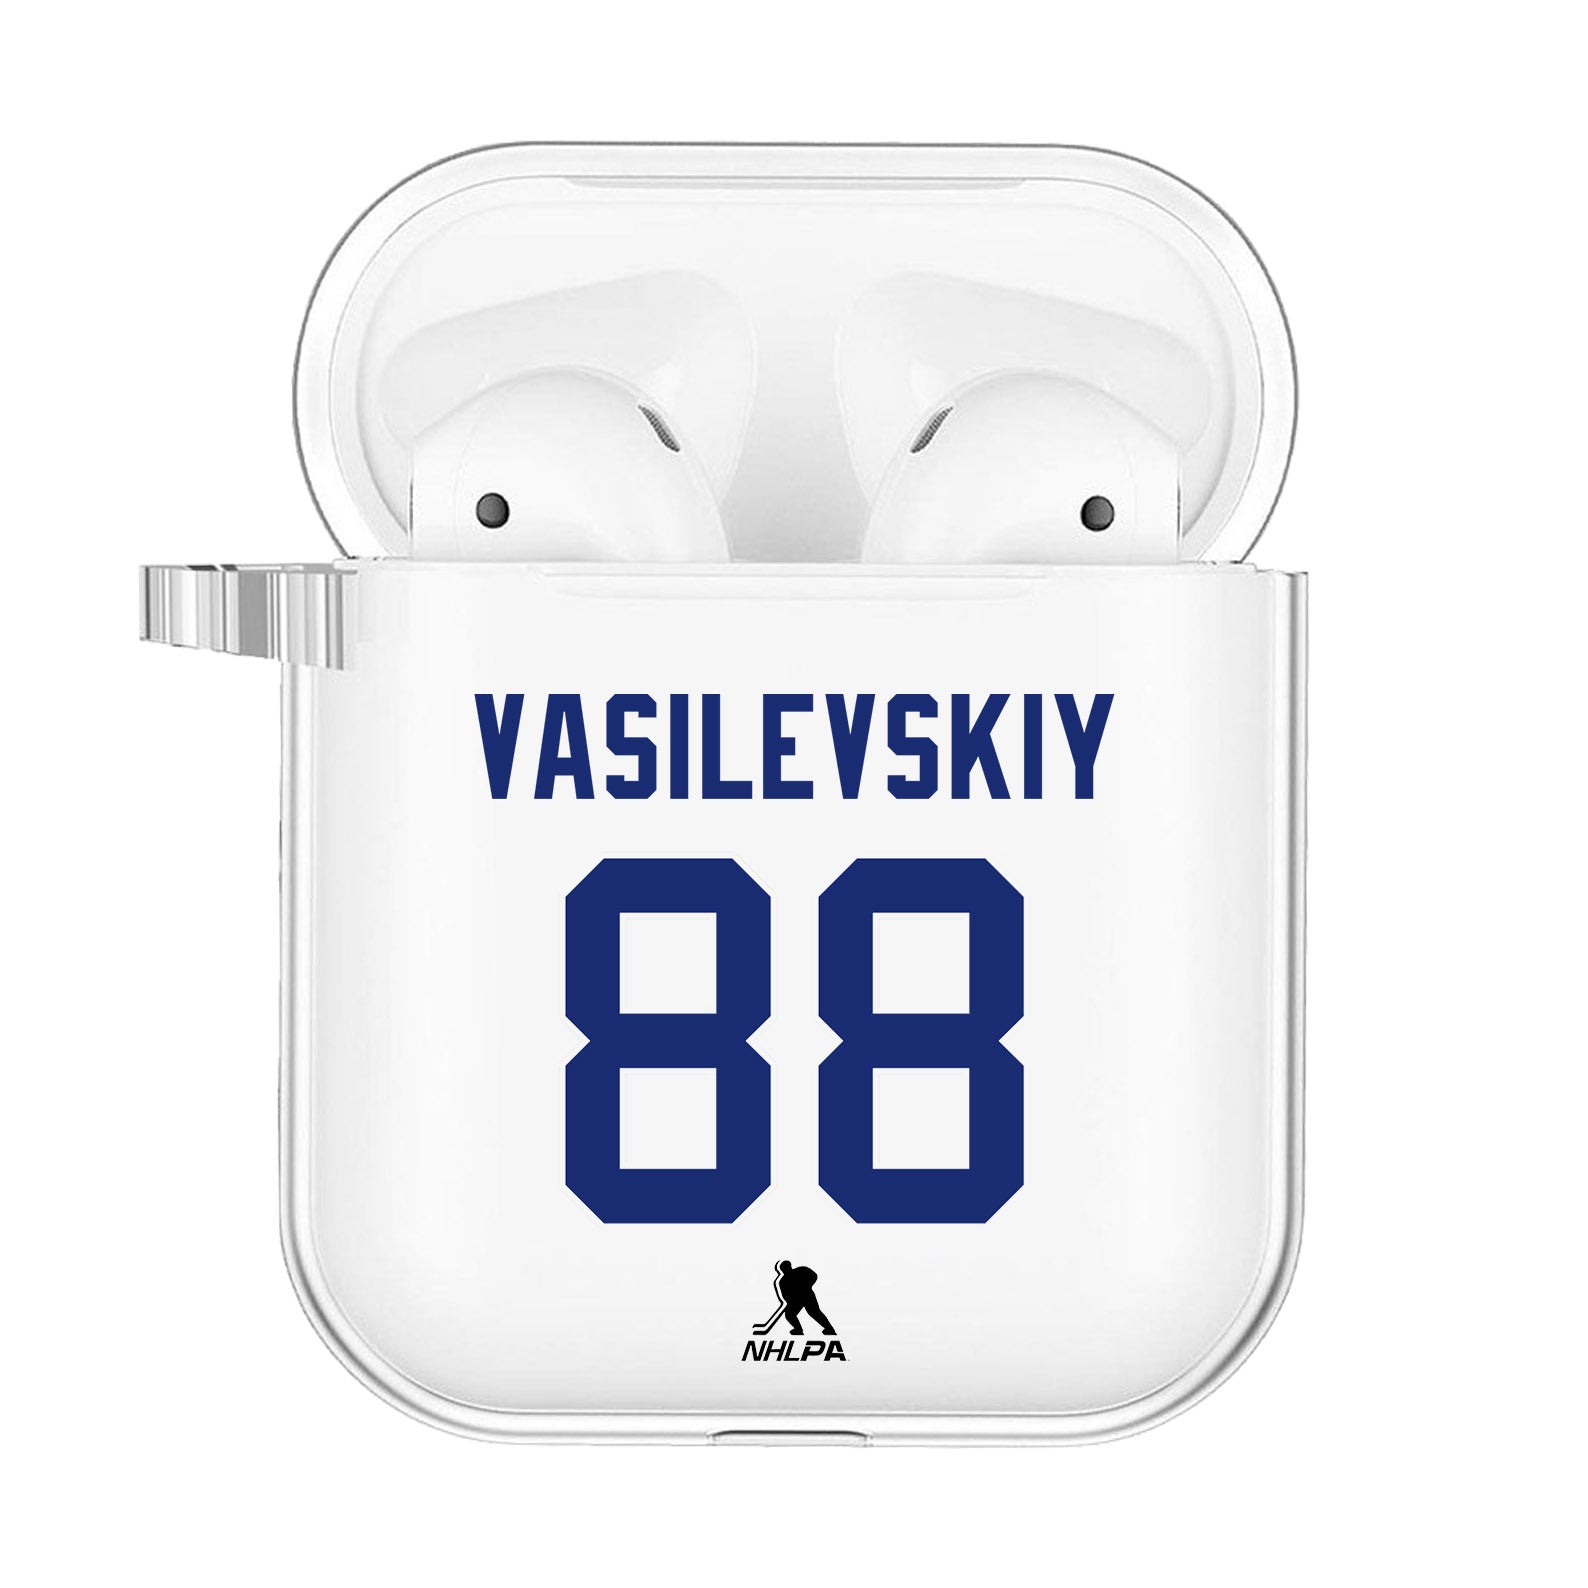 Tampa Bay AirPod Cases